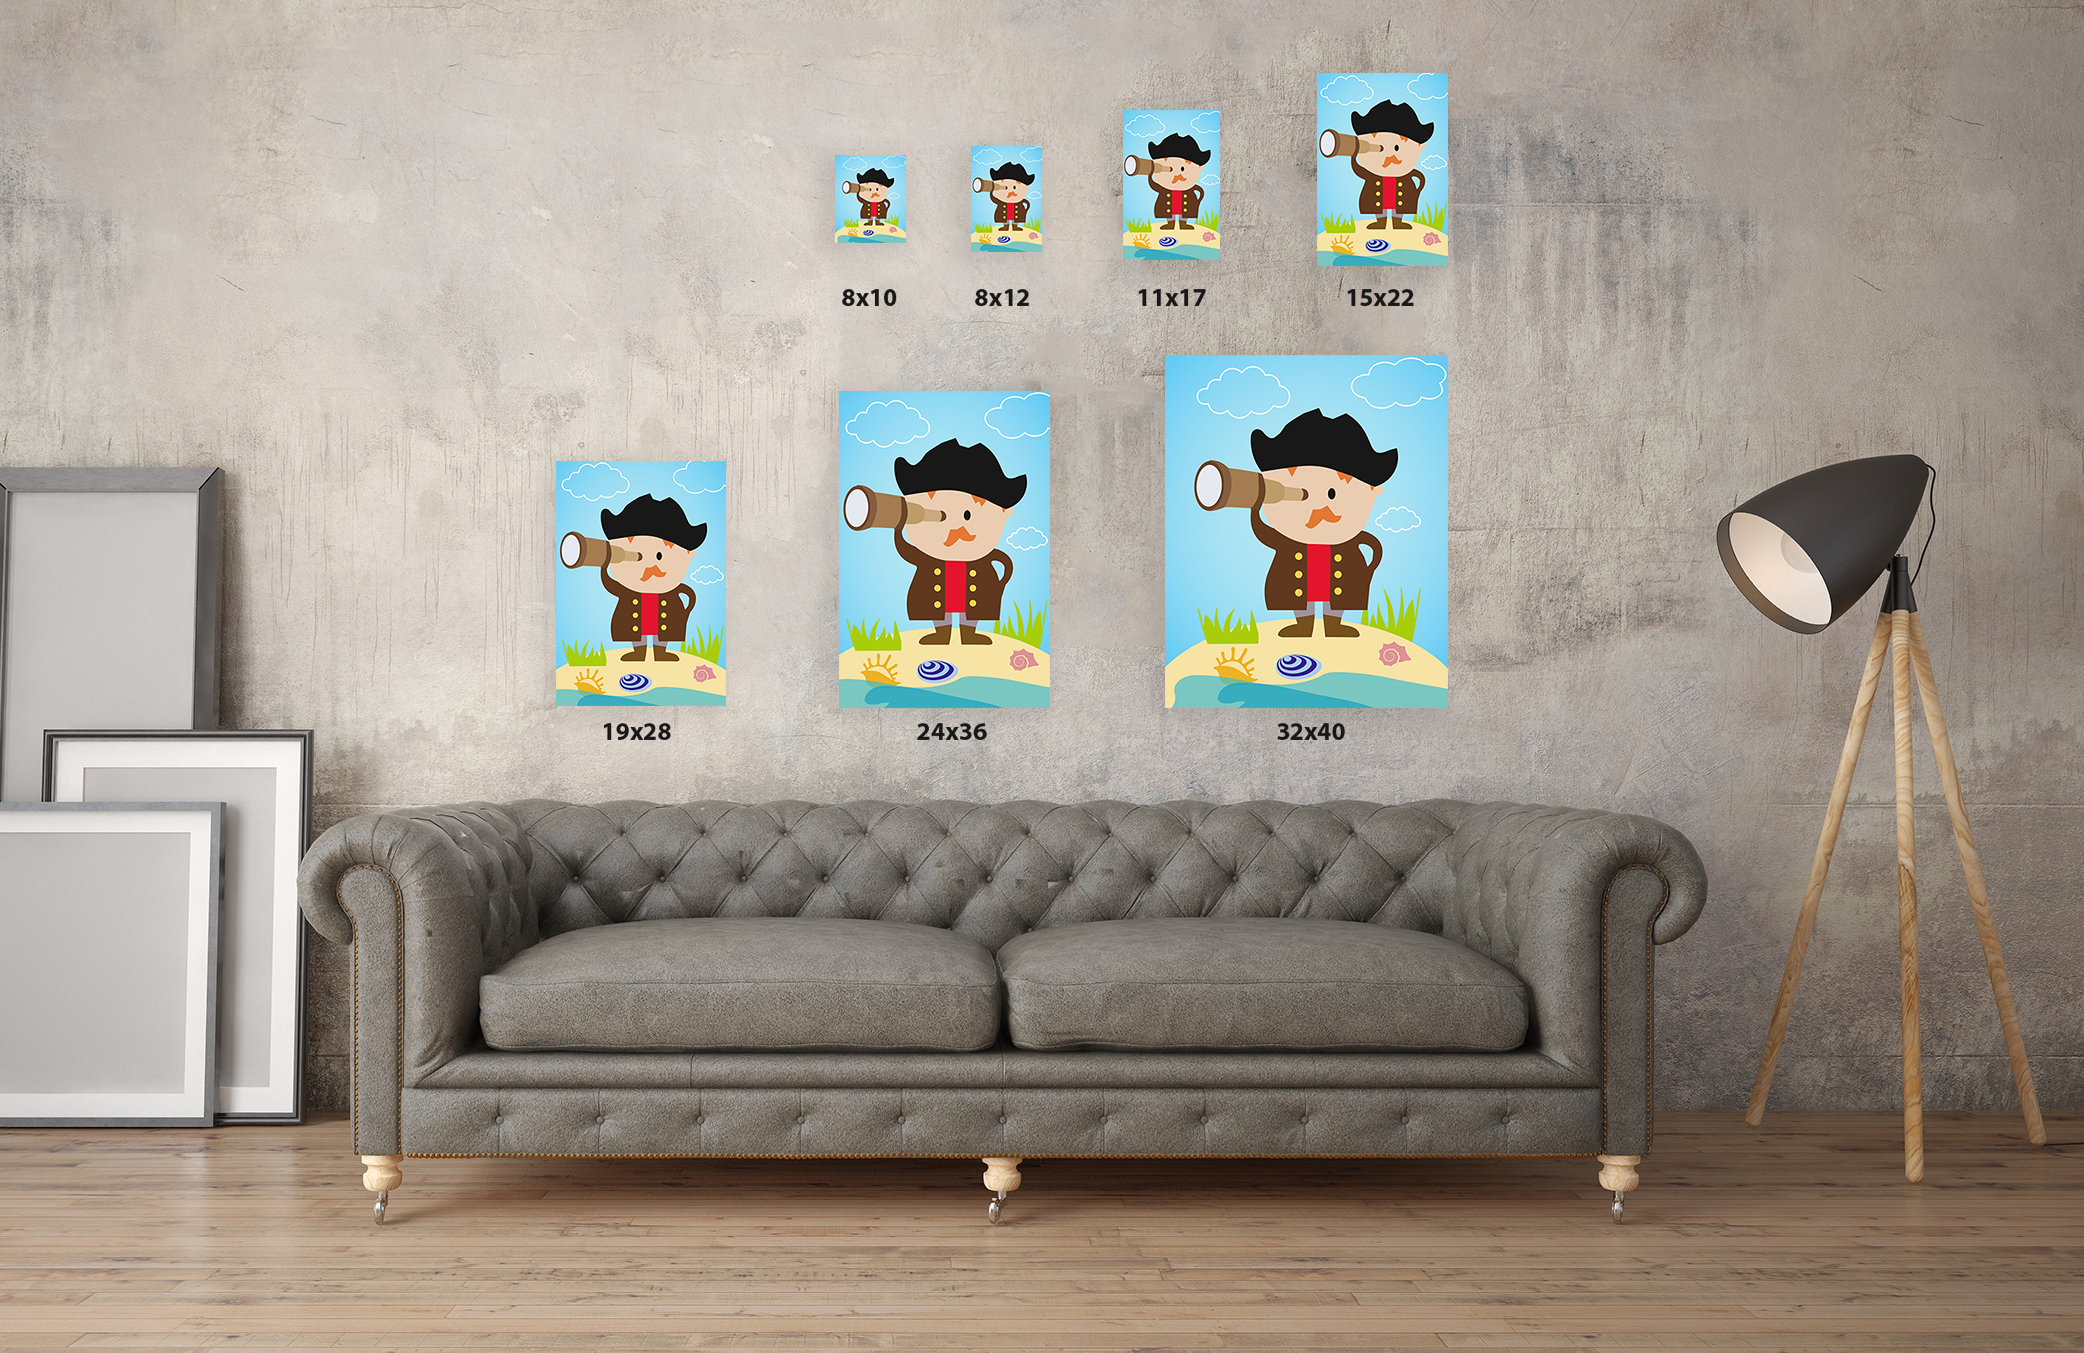 Awkward Styles Marine Picture Kids Play Room Wall Art Funny Pirates Art Newborn Baby Room Wall Decor Pirates Wallpapers Made in USA Little Pirate Picture Pirate Poster Print Kids Room Wall Art - image 3 of 3